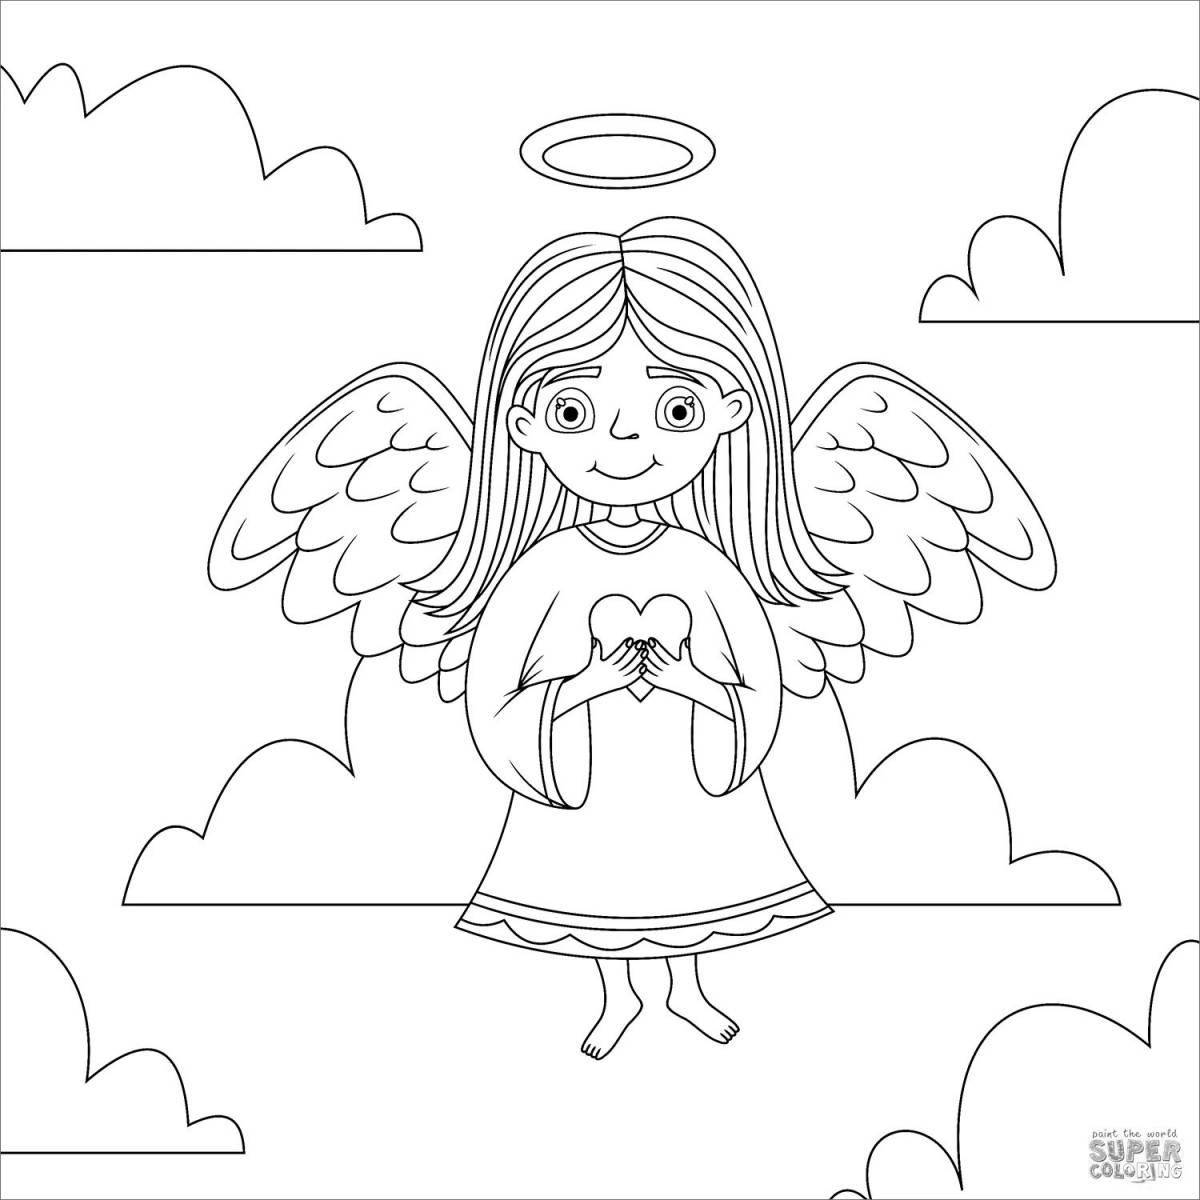 Great angel face coloring book